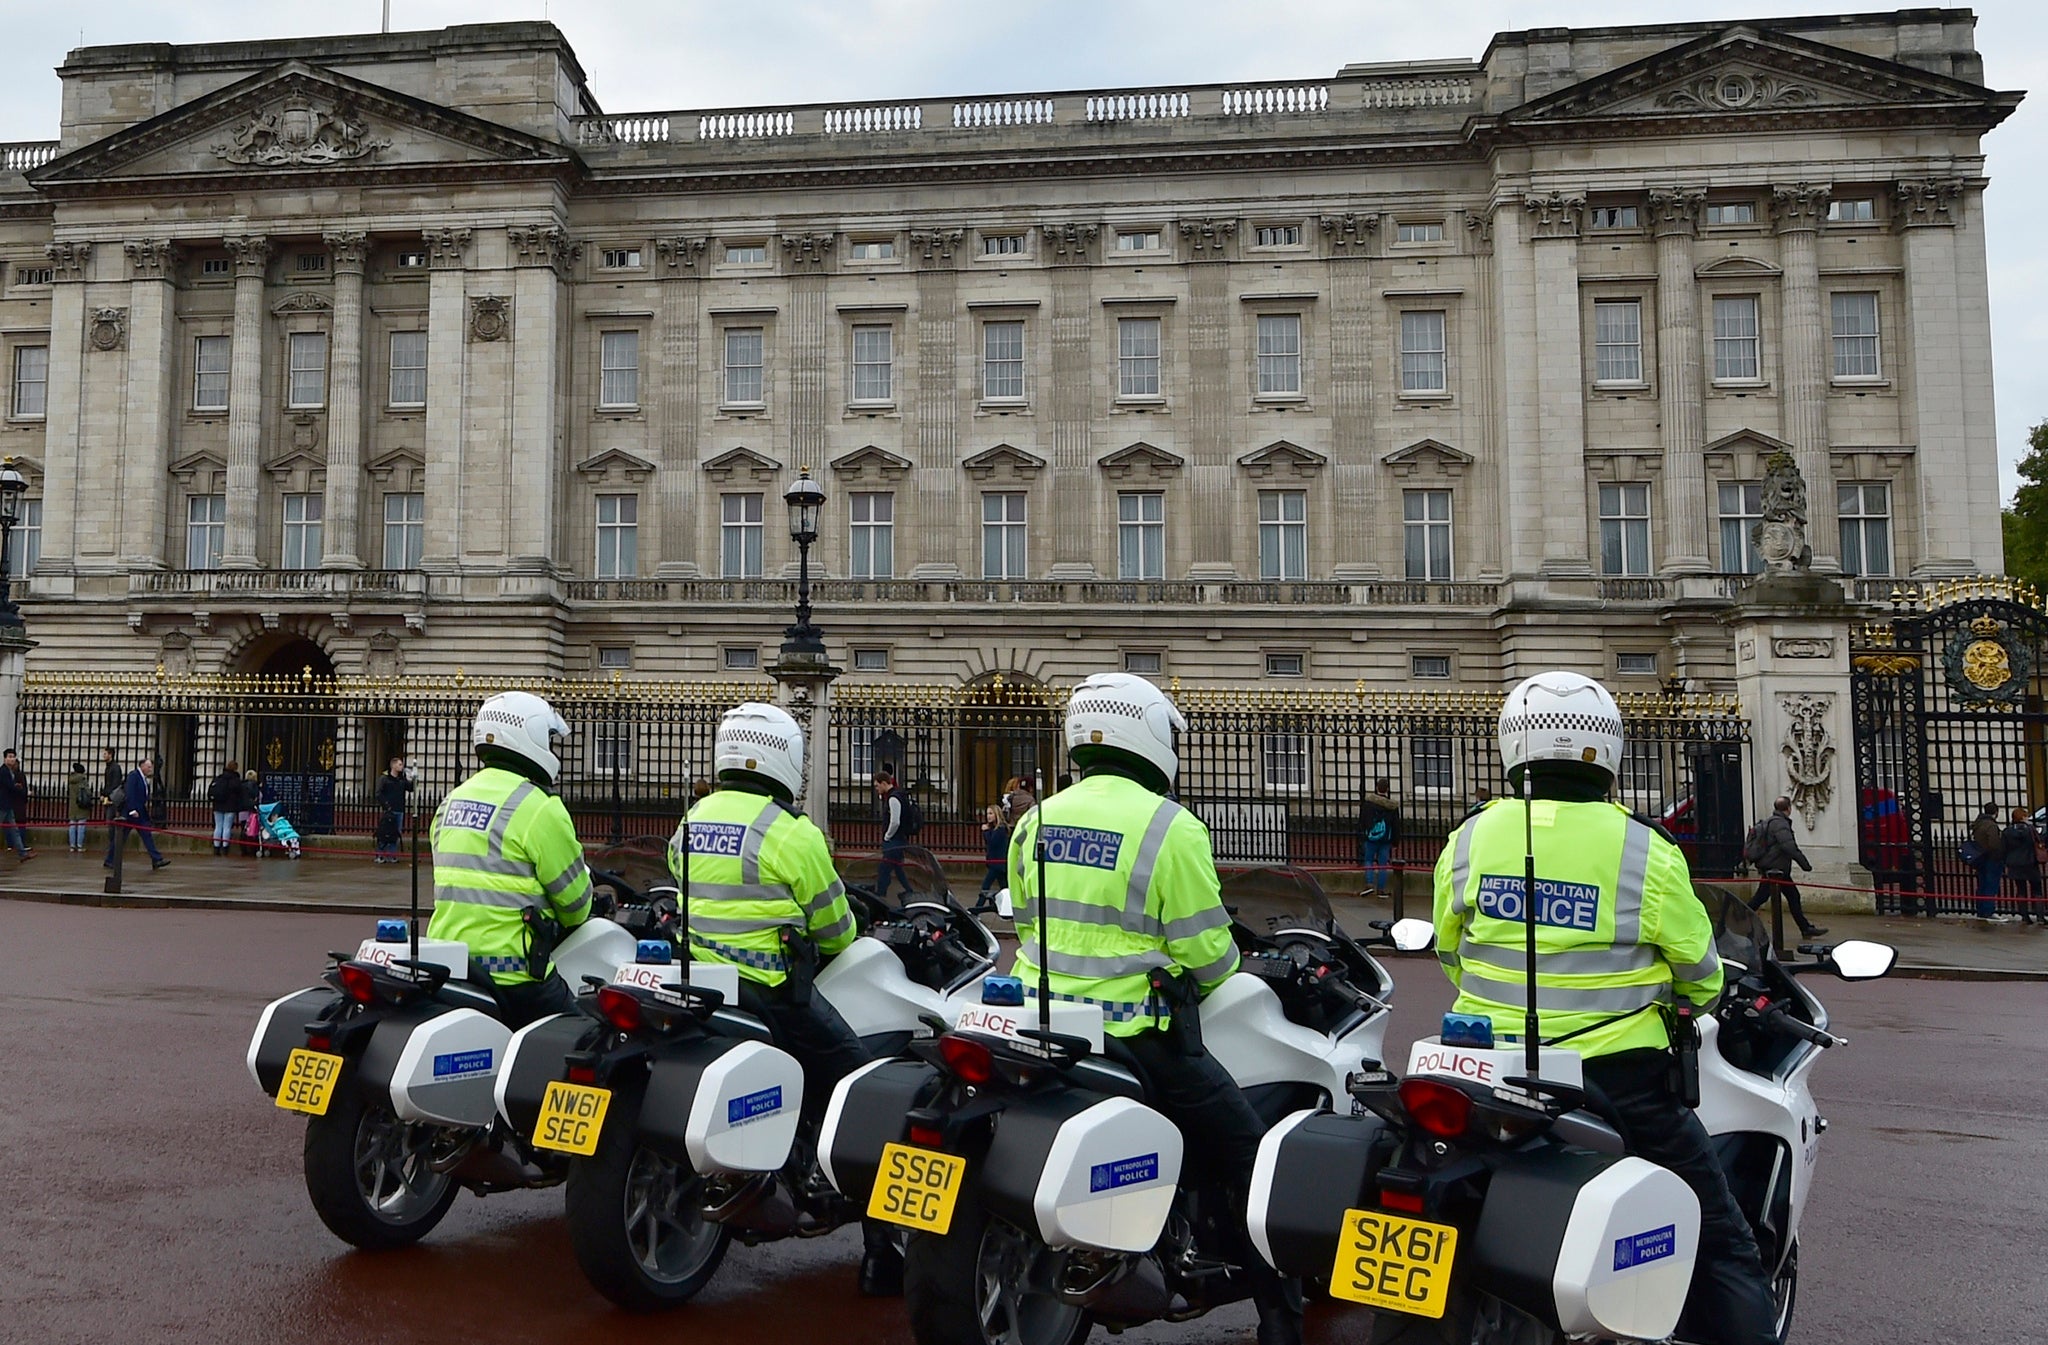 Police motorcyclists are already used to escort Royals